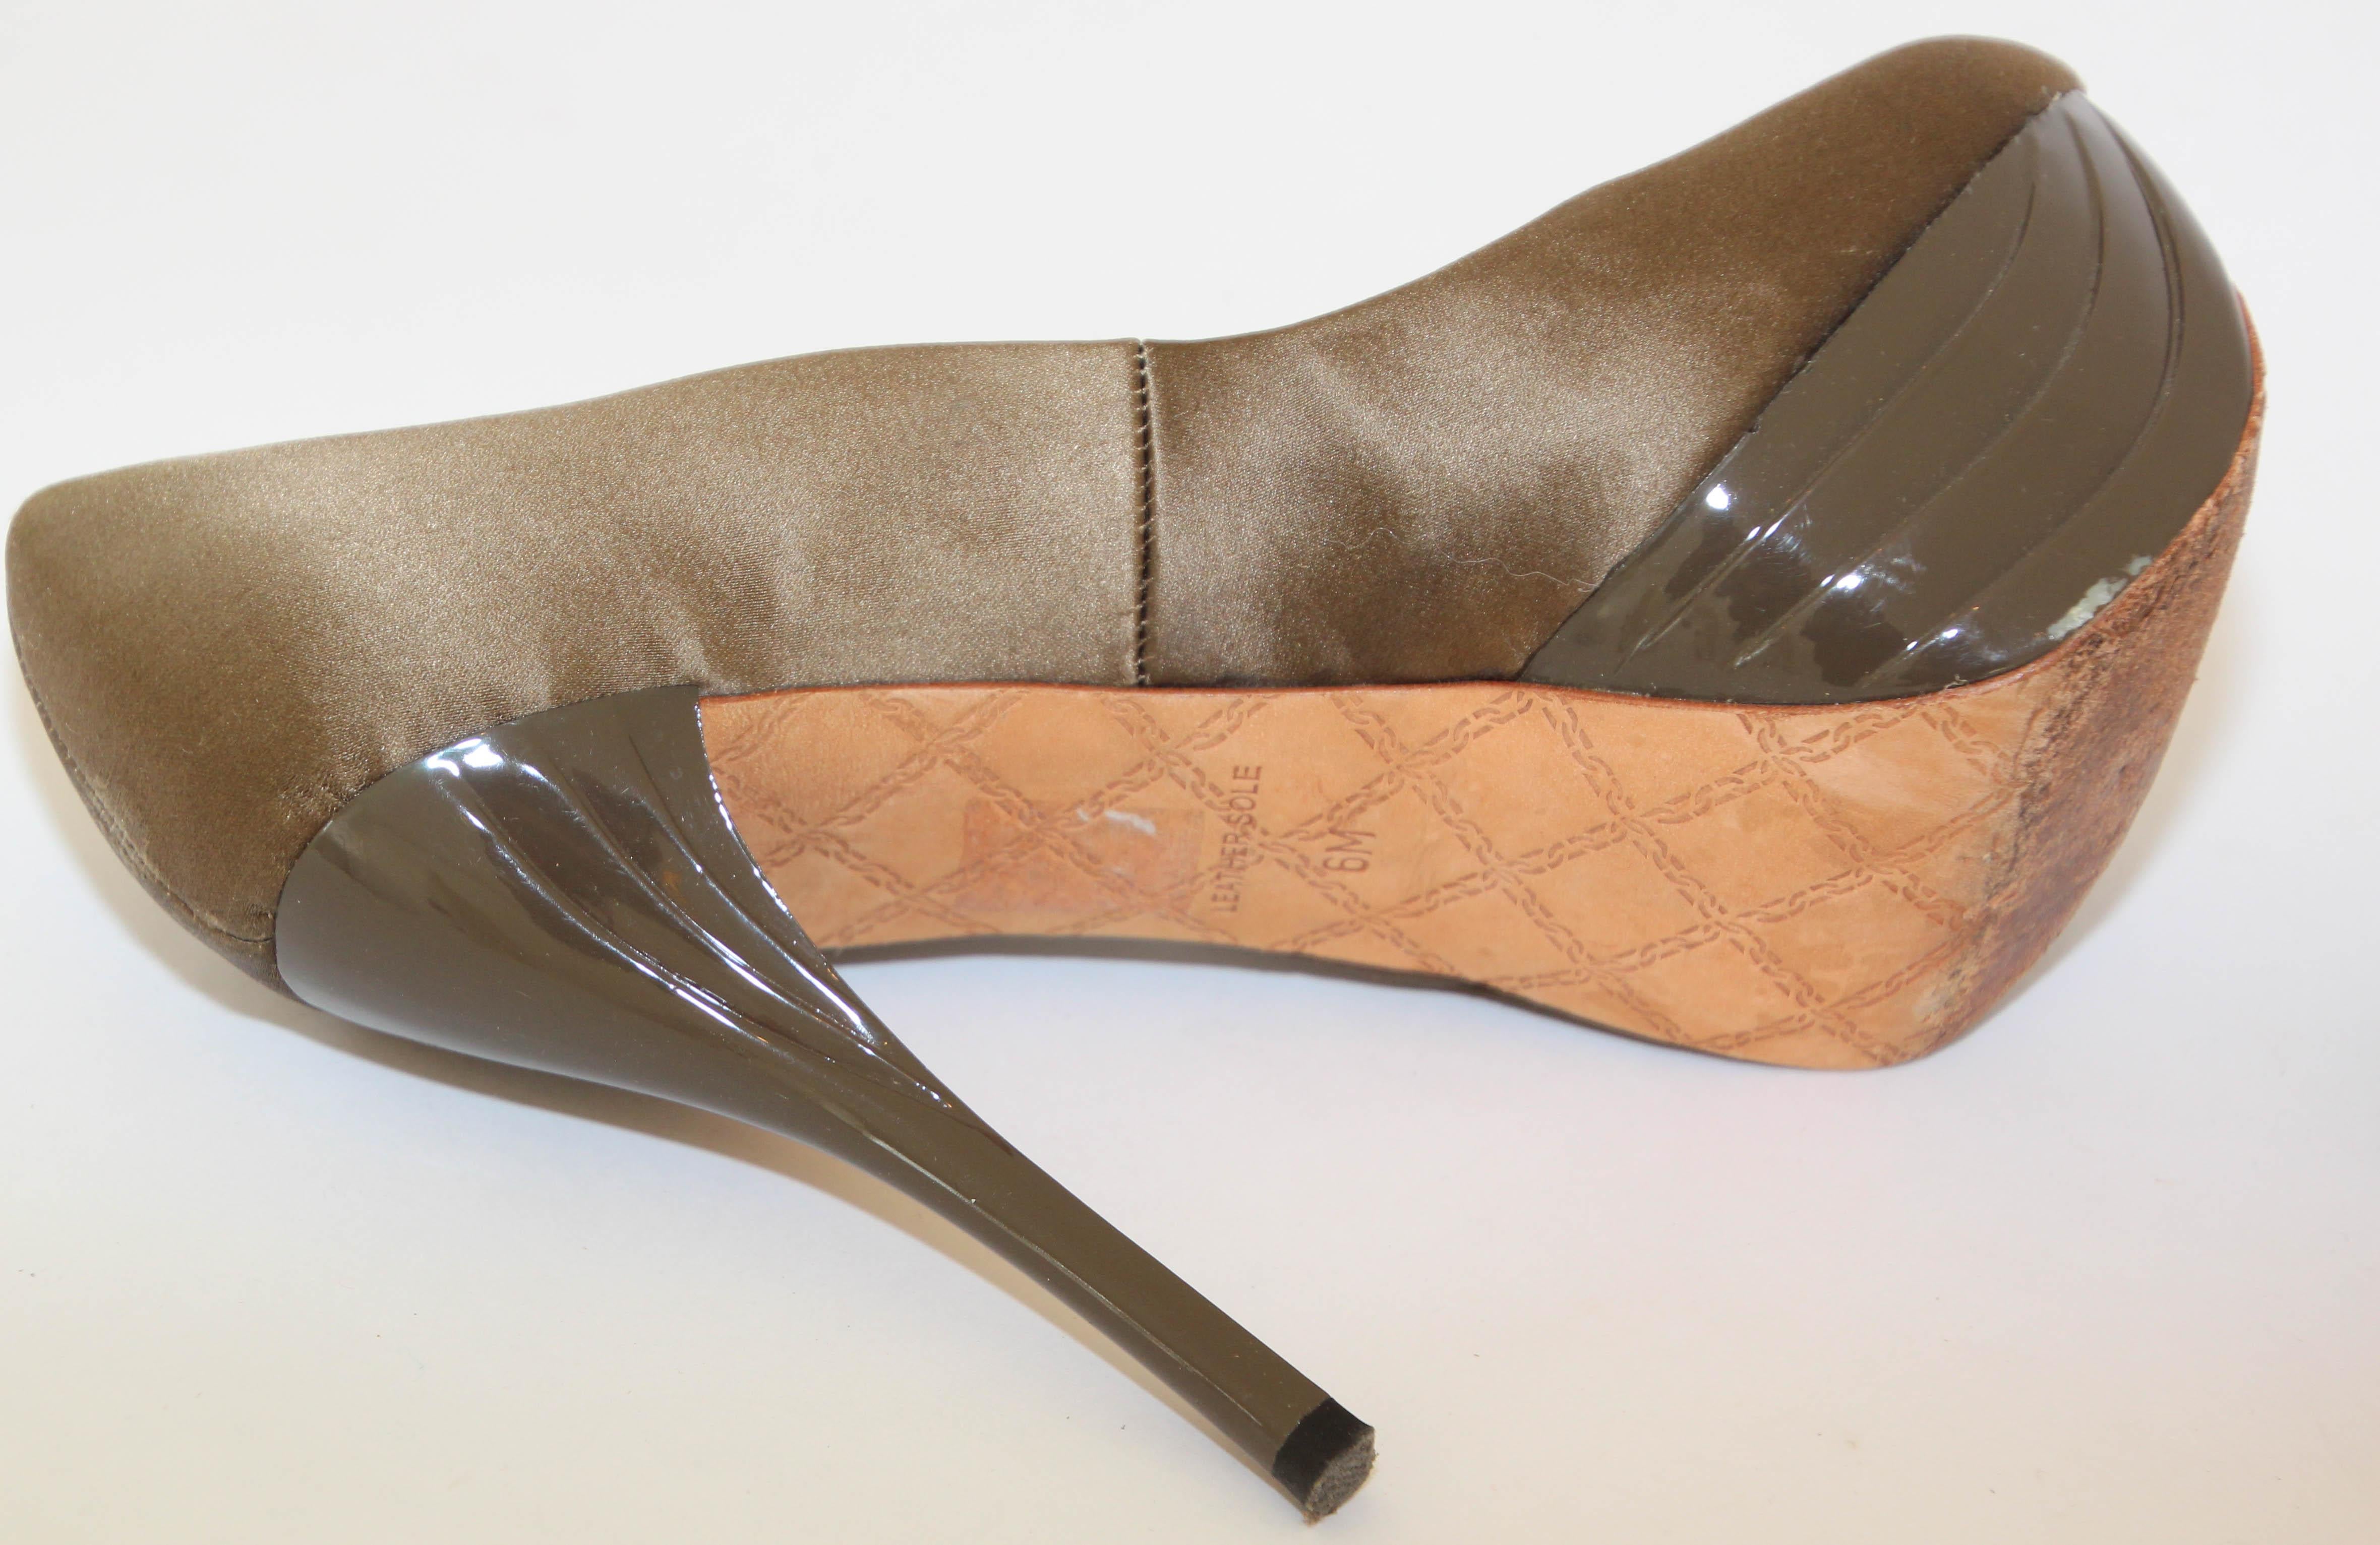 L.A.M.B. LAMB Z-Project Satin and Lacquer Dark Taupe Platform Heels 6 M For Sale 3